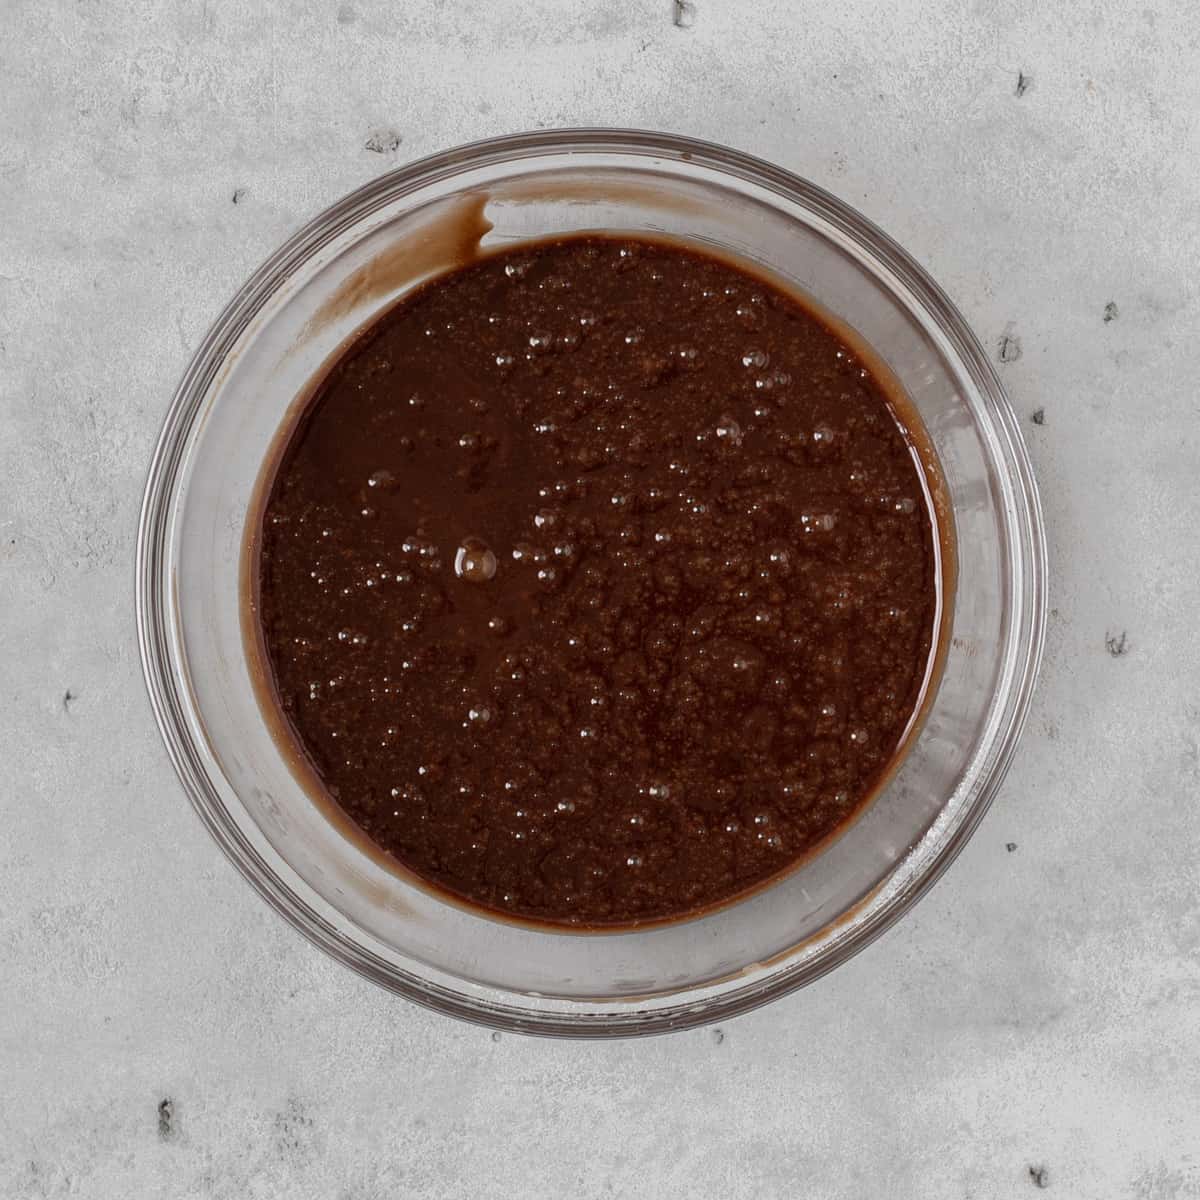 the completed lava cake batter in a glass bowl on a grey background.